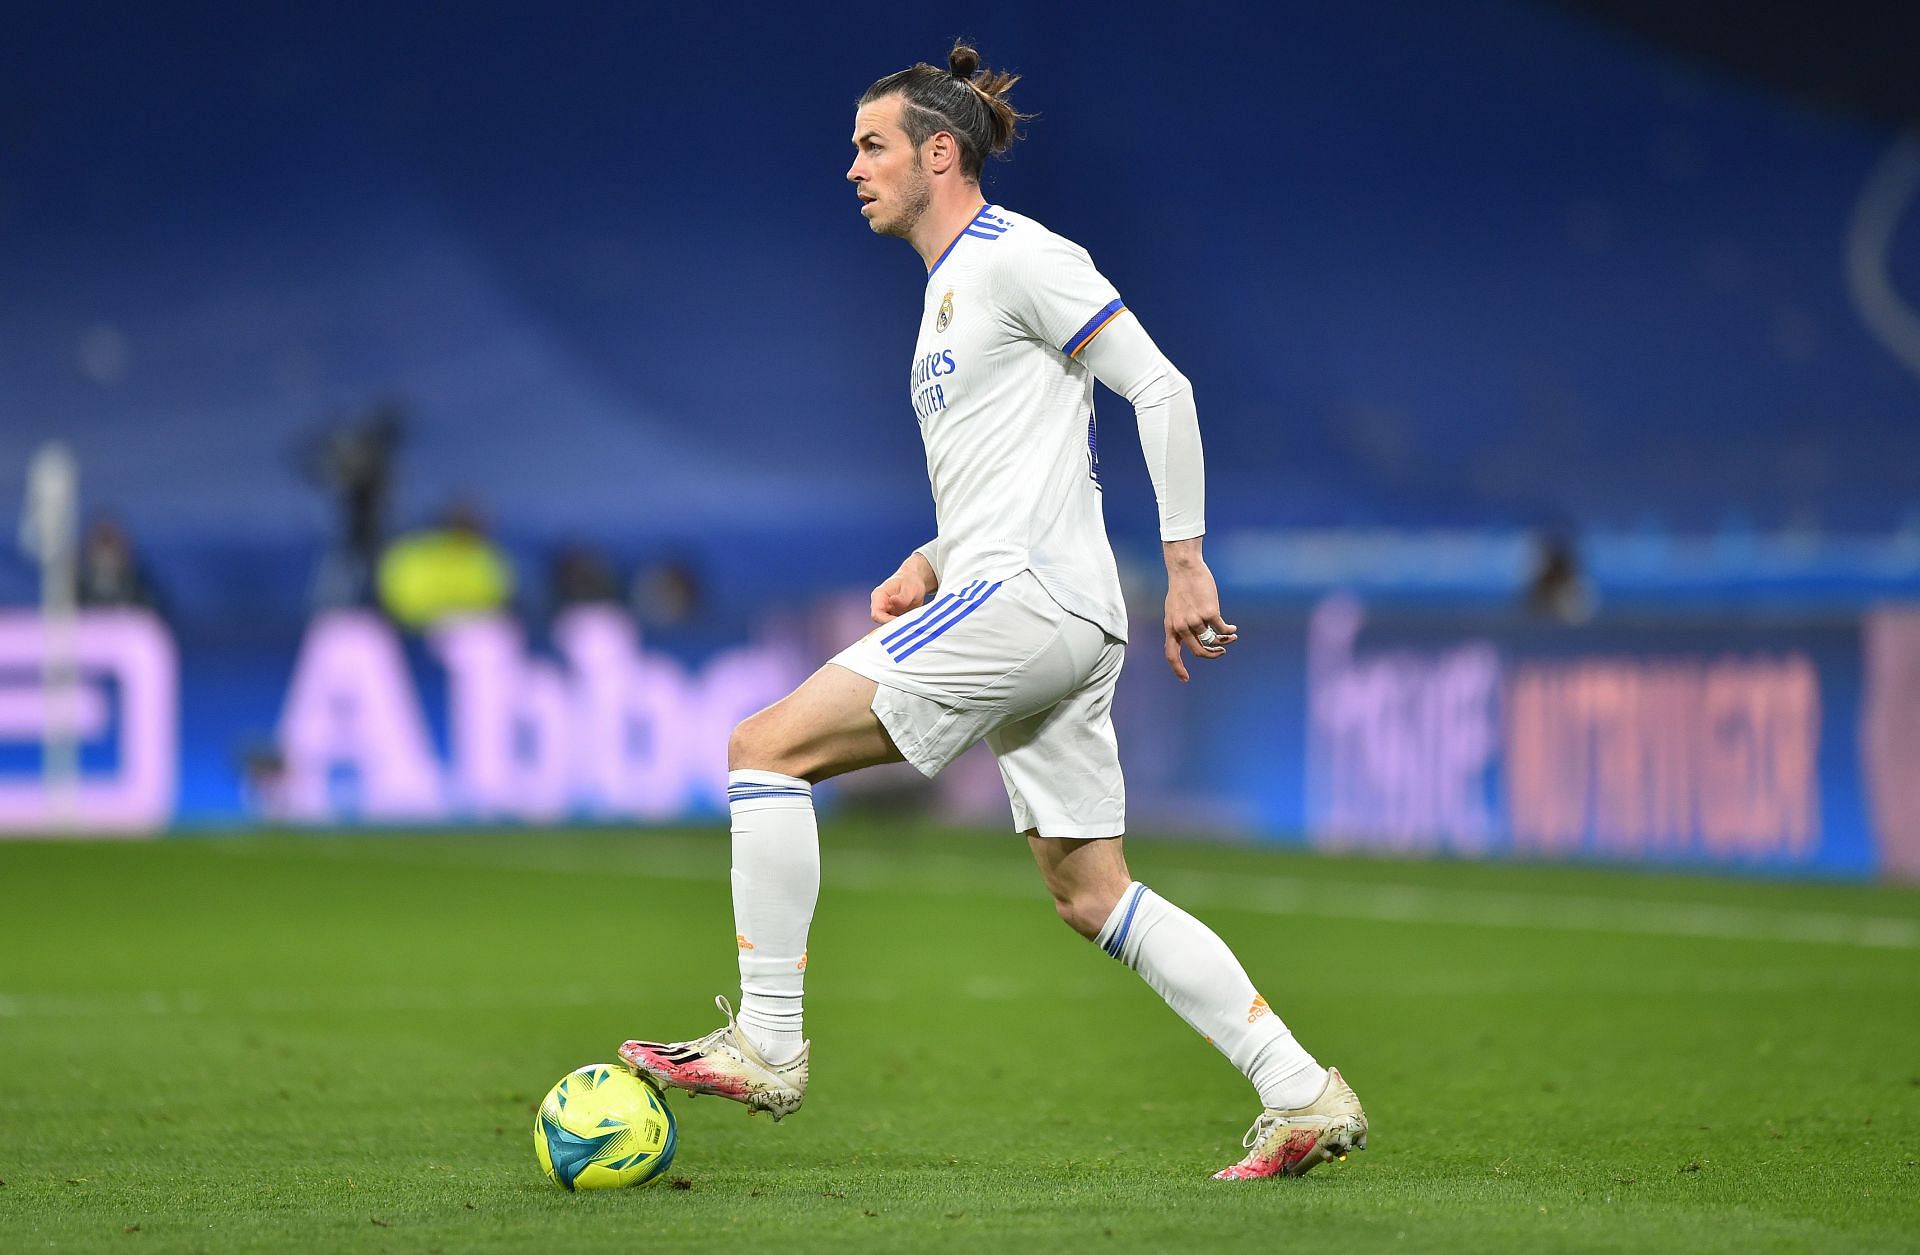 Gareth Bale is all set to leave Real Madrid this summer.